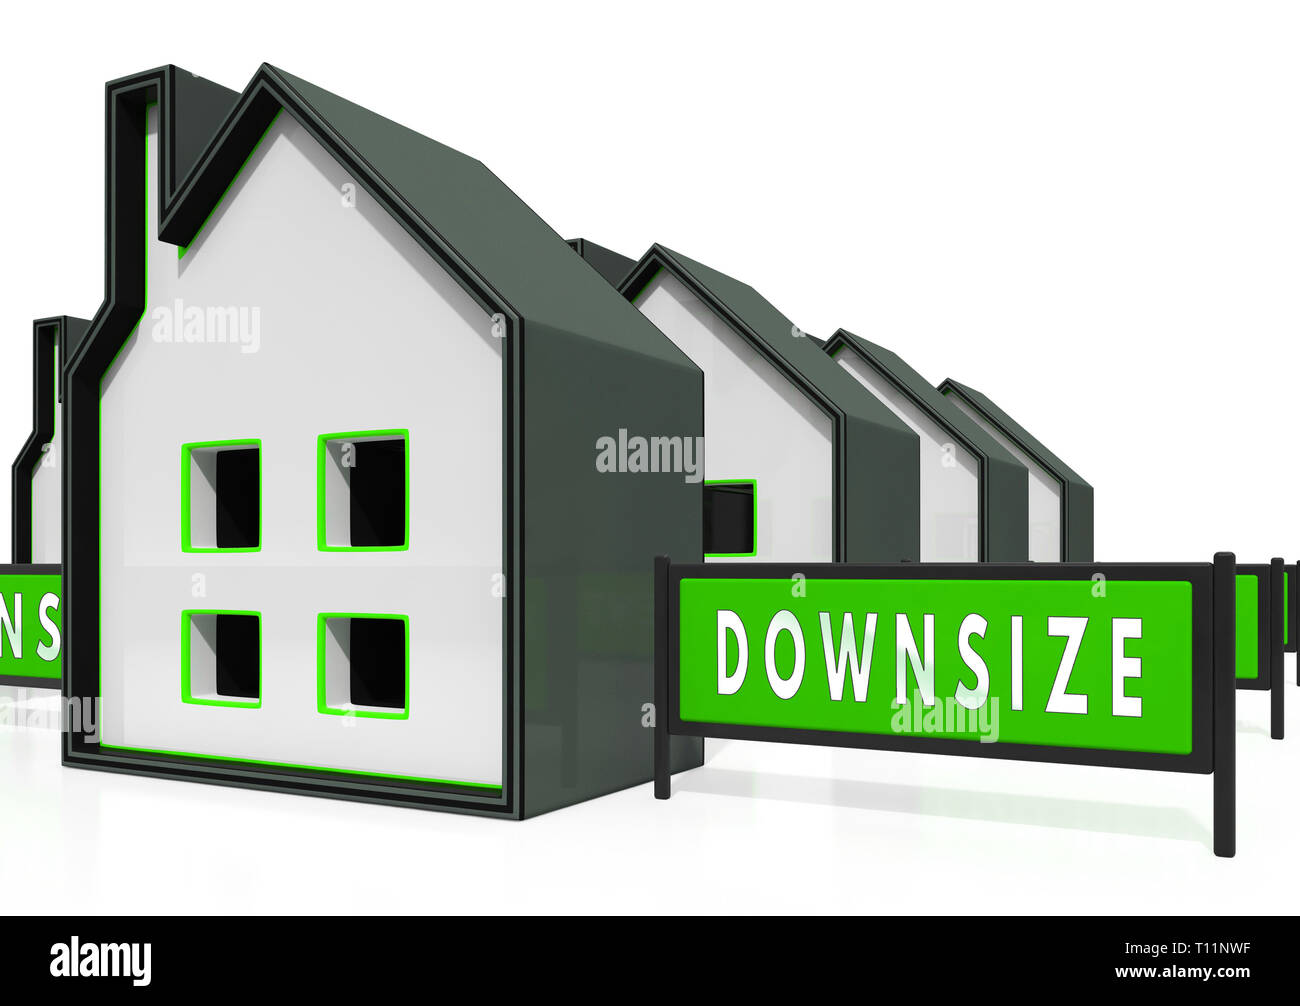 Downsize Home Icons Means Downsizing Property Due To Retirement Or Budget. Find A Tiny House Or Apartment - 3d Illustration Stock Photo